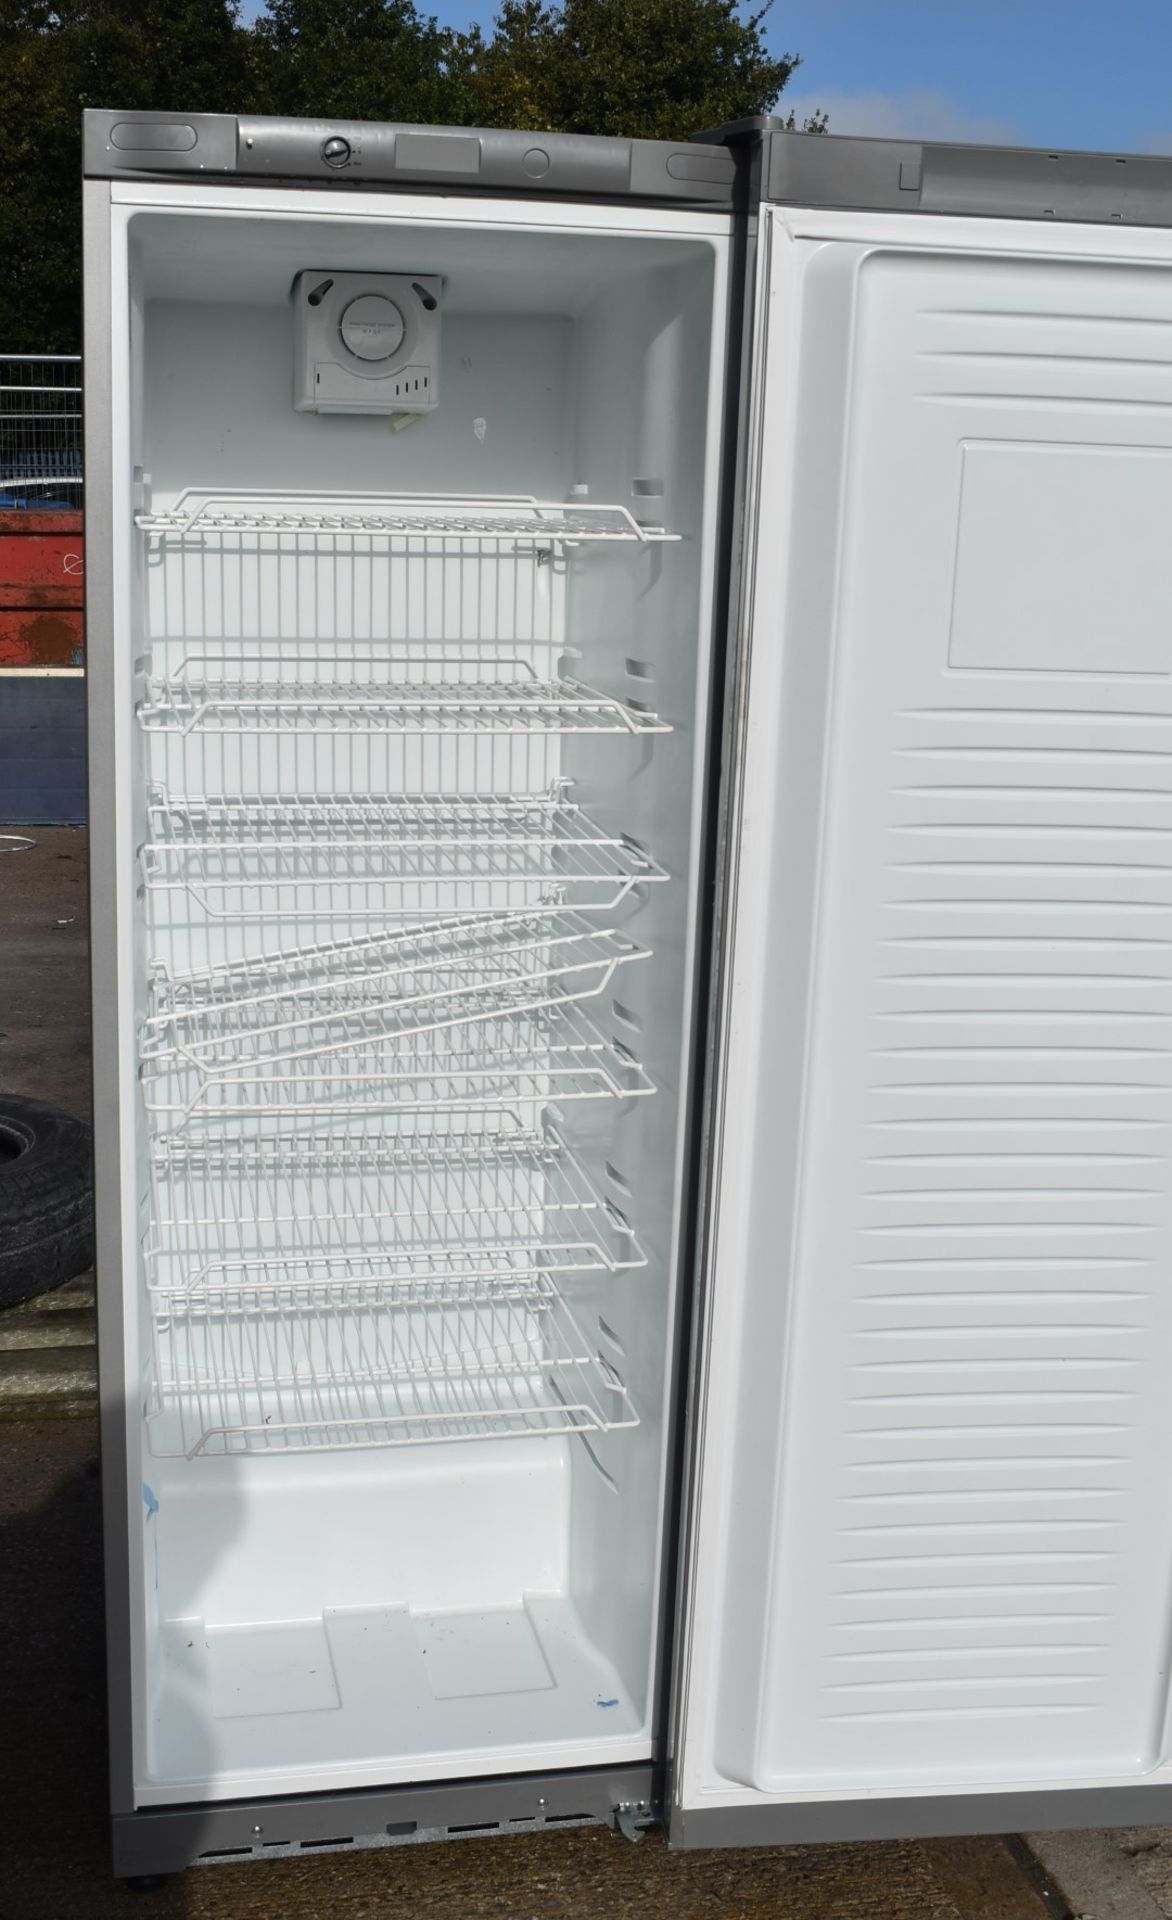 1 x Elstar Upright Commercial Refridgerator With Silver Finish - Model ARR350S - Image 2 of 8